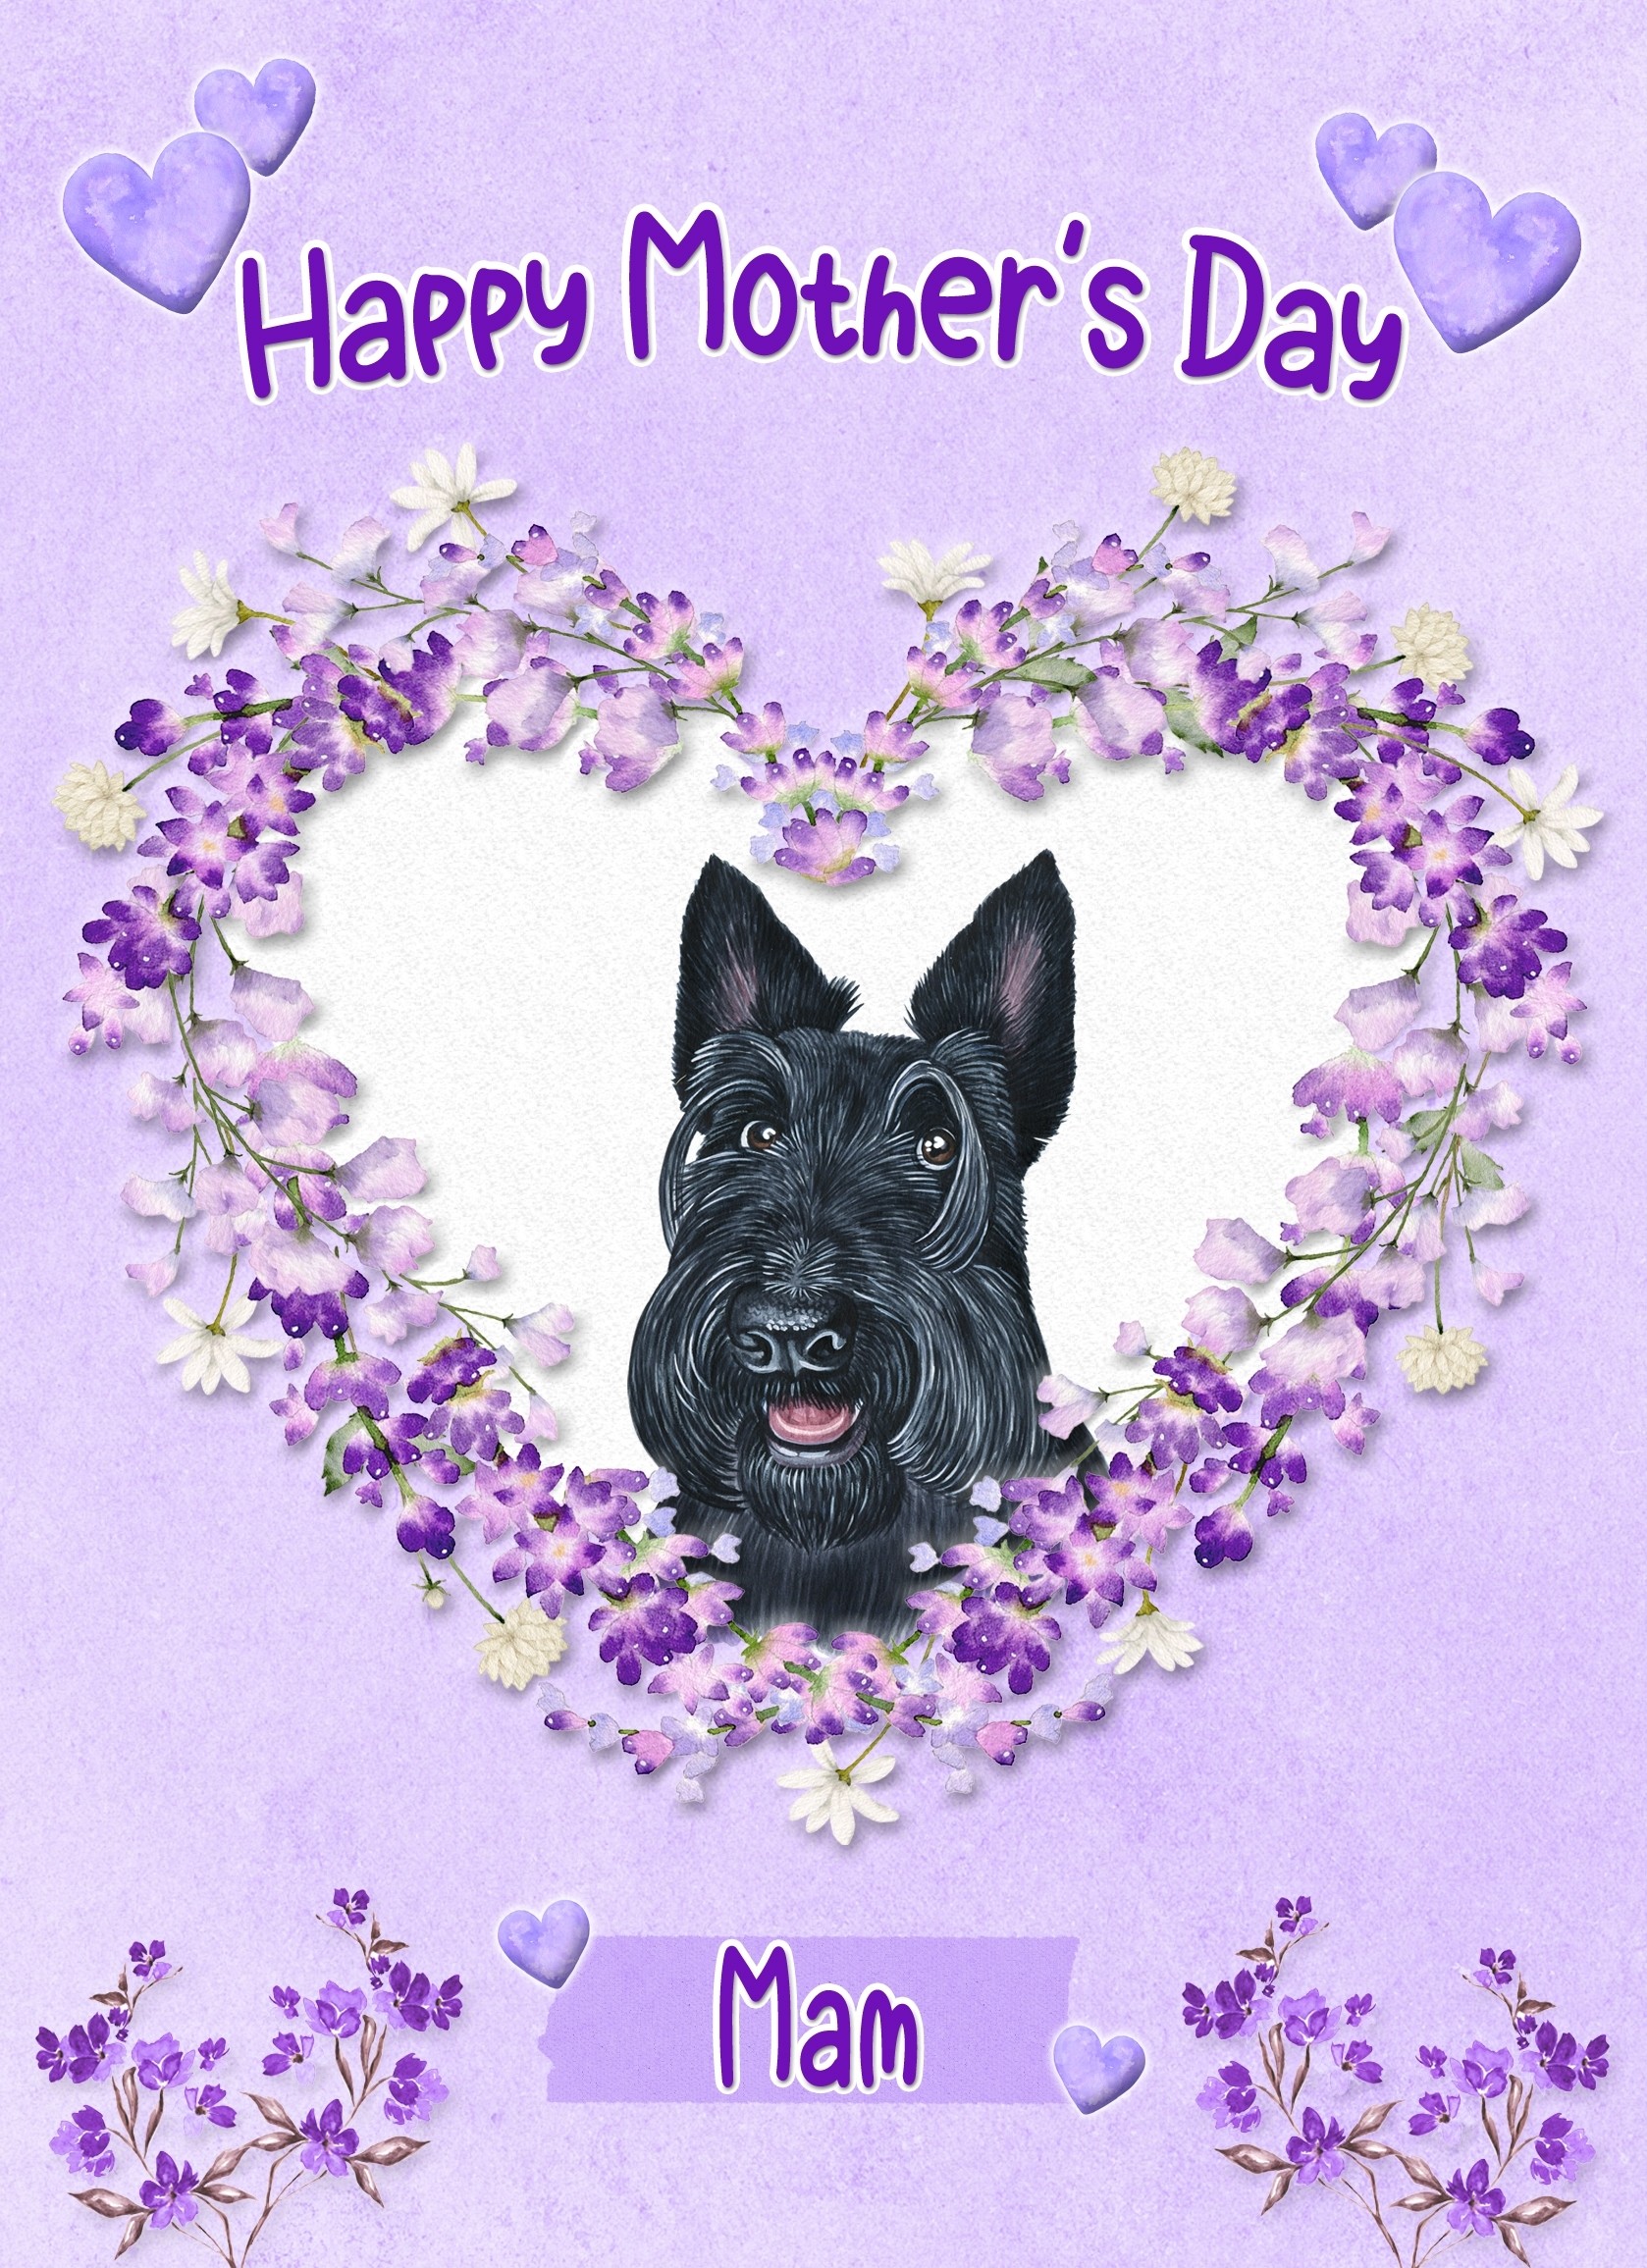 Scottish Terrier Dog Mothers Day Card (Happy Mothers, Mam)